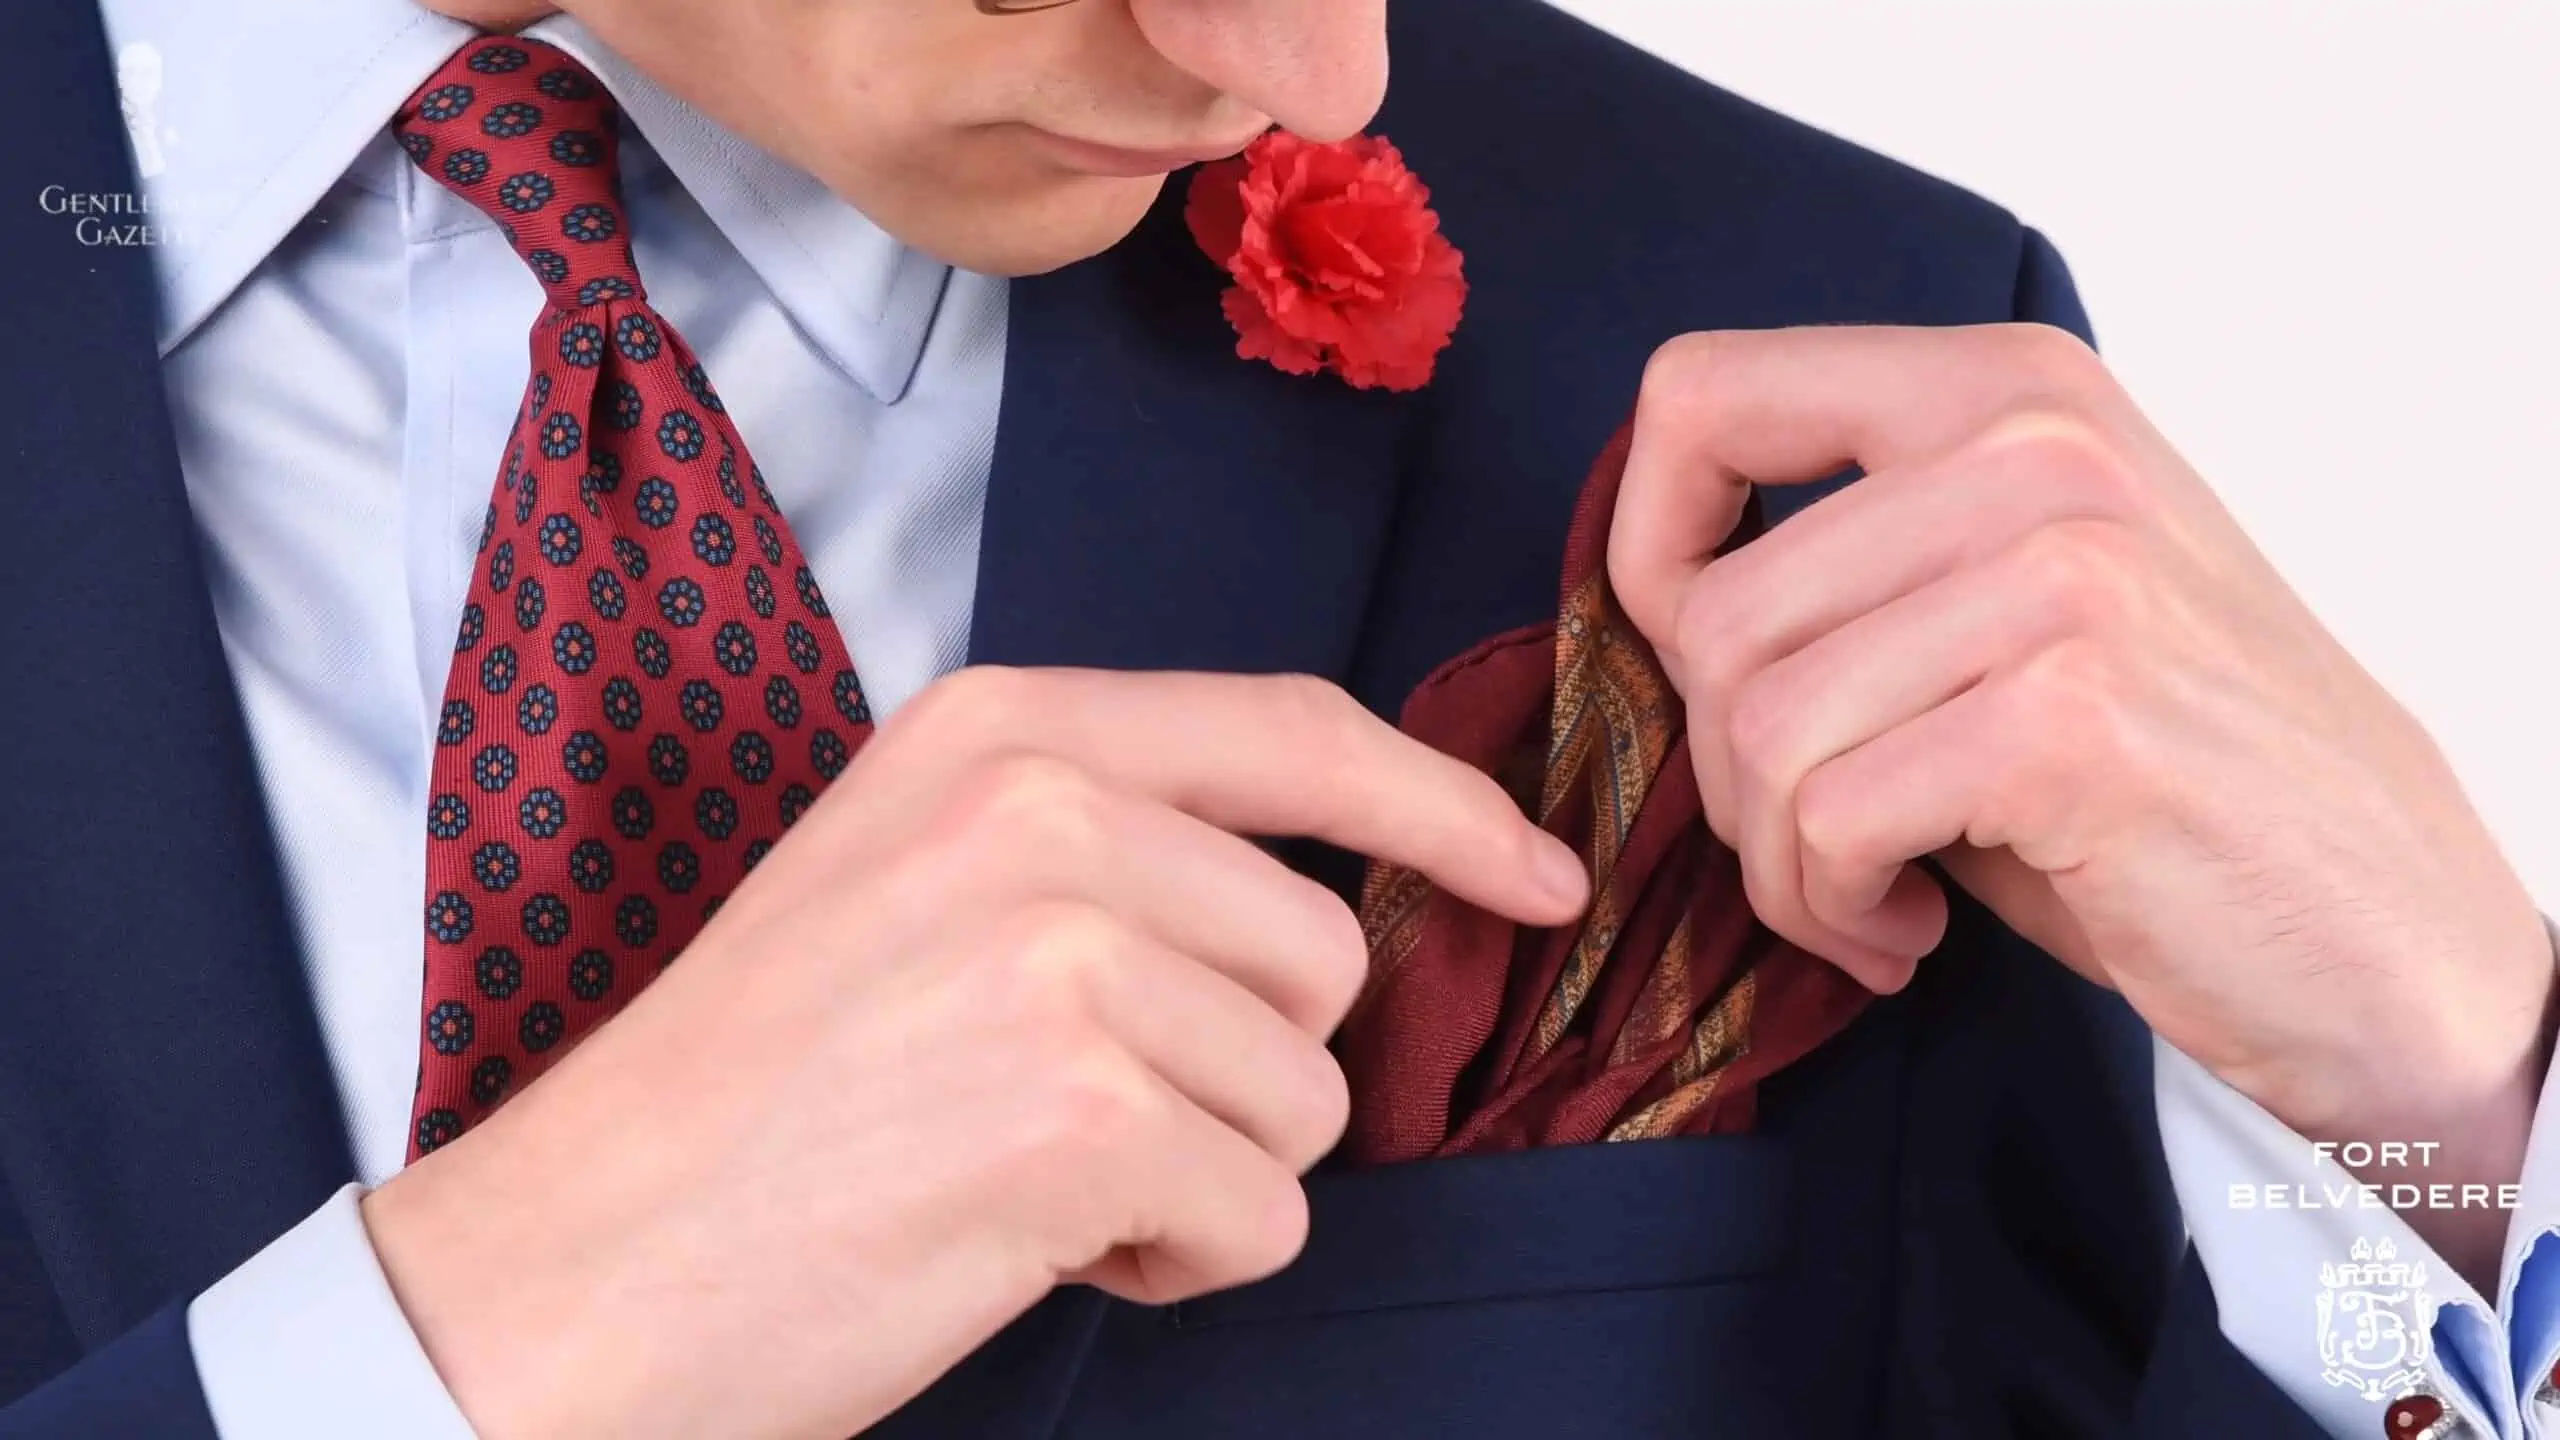 Preston in Red and Blue Outfit featuring A Fort Belvedere Pocket Square